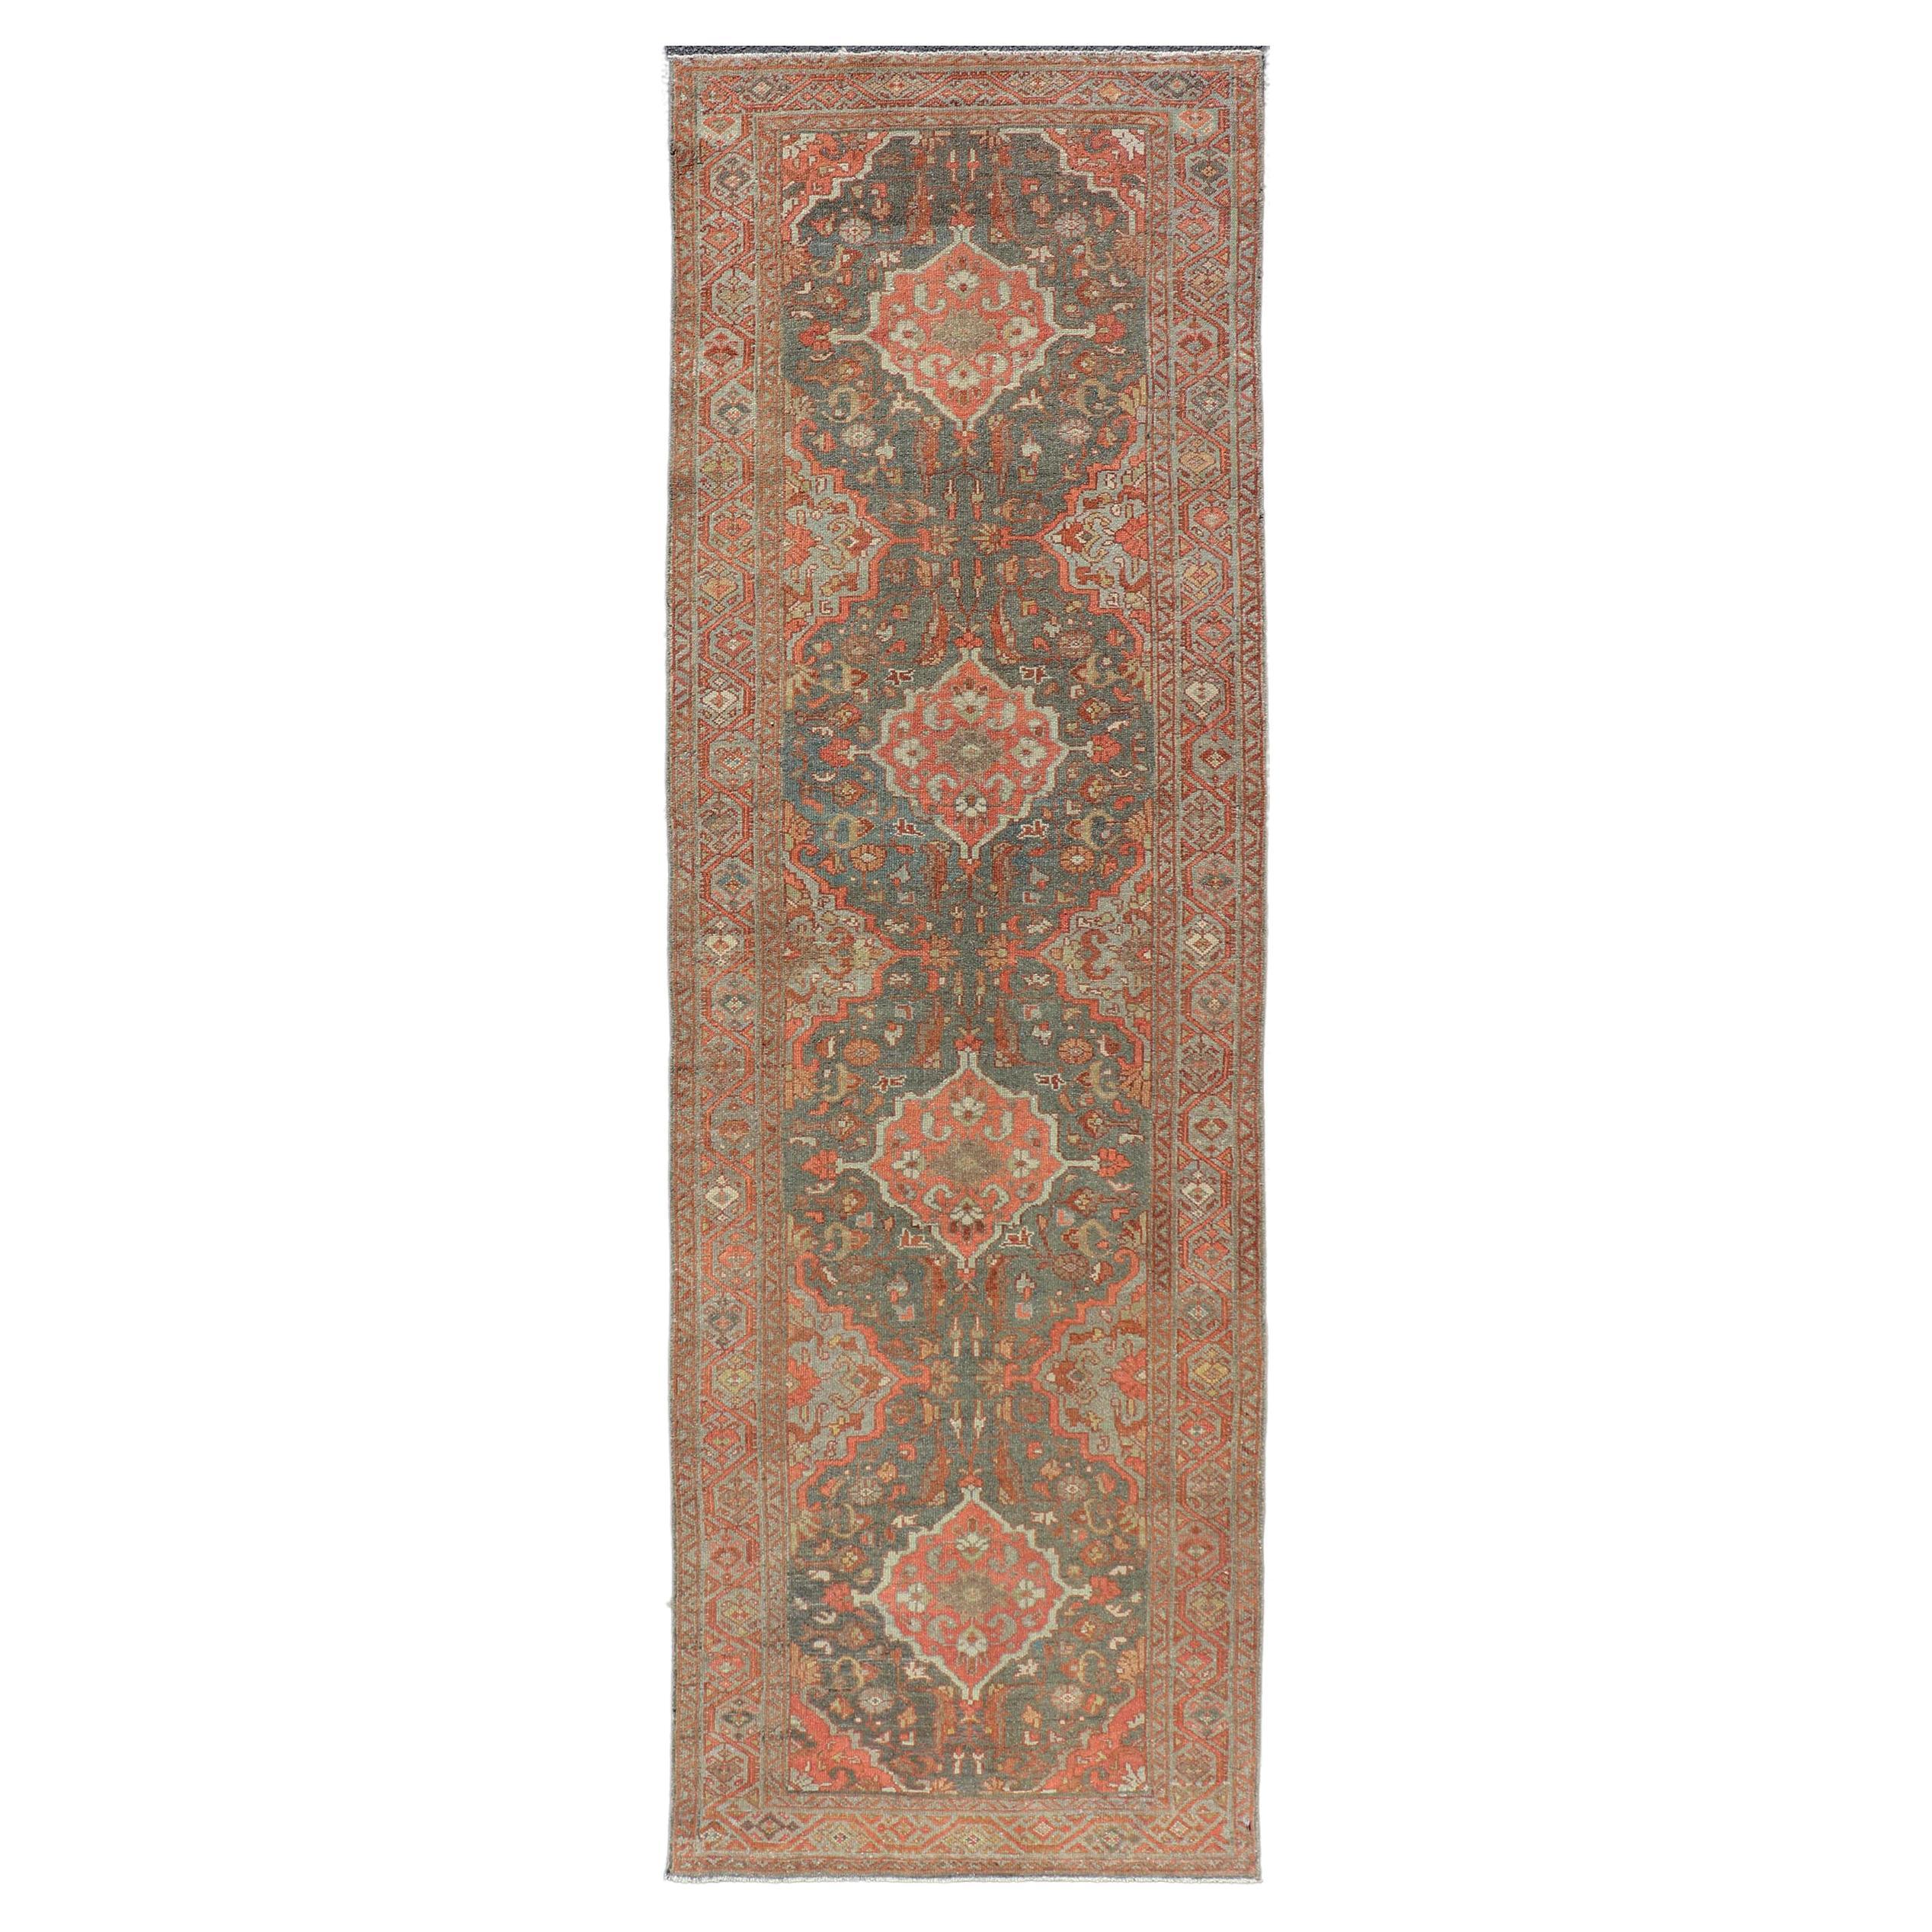 Antique Persian Malayer Runner with All-Over Floral Medallions Design